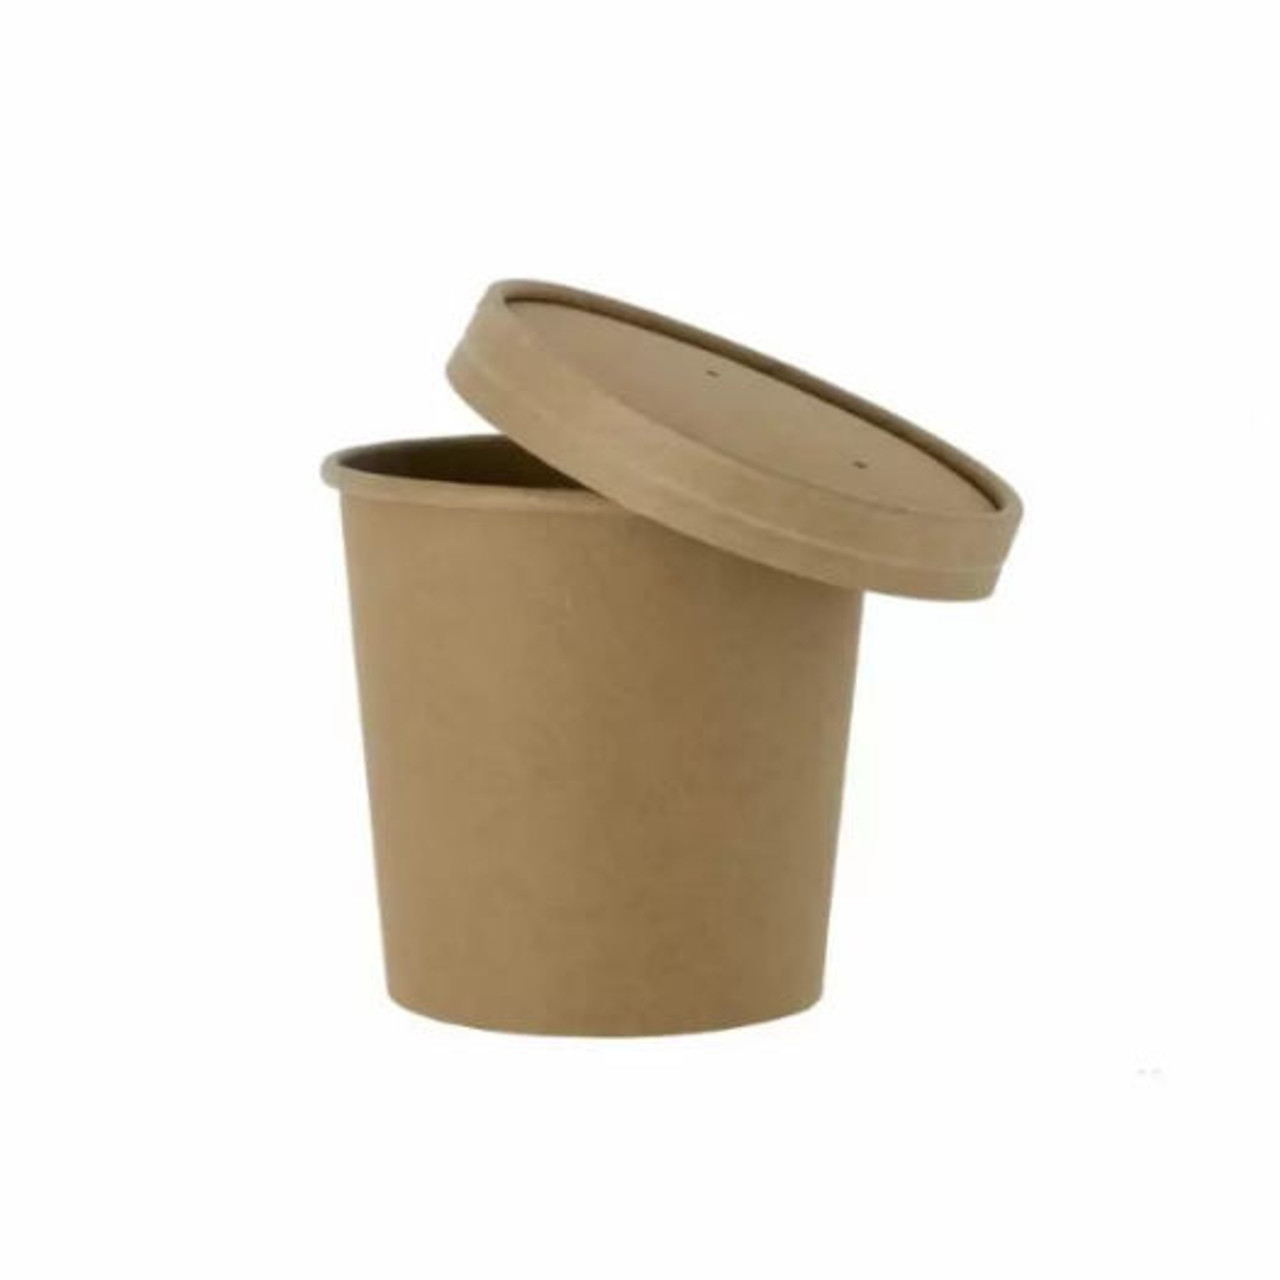 Cardboard Soup containers  insulated takeout hot containers